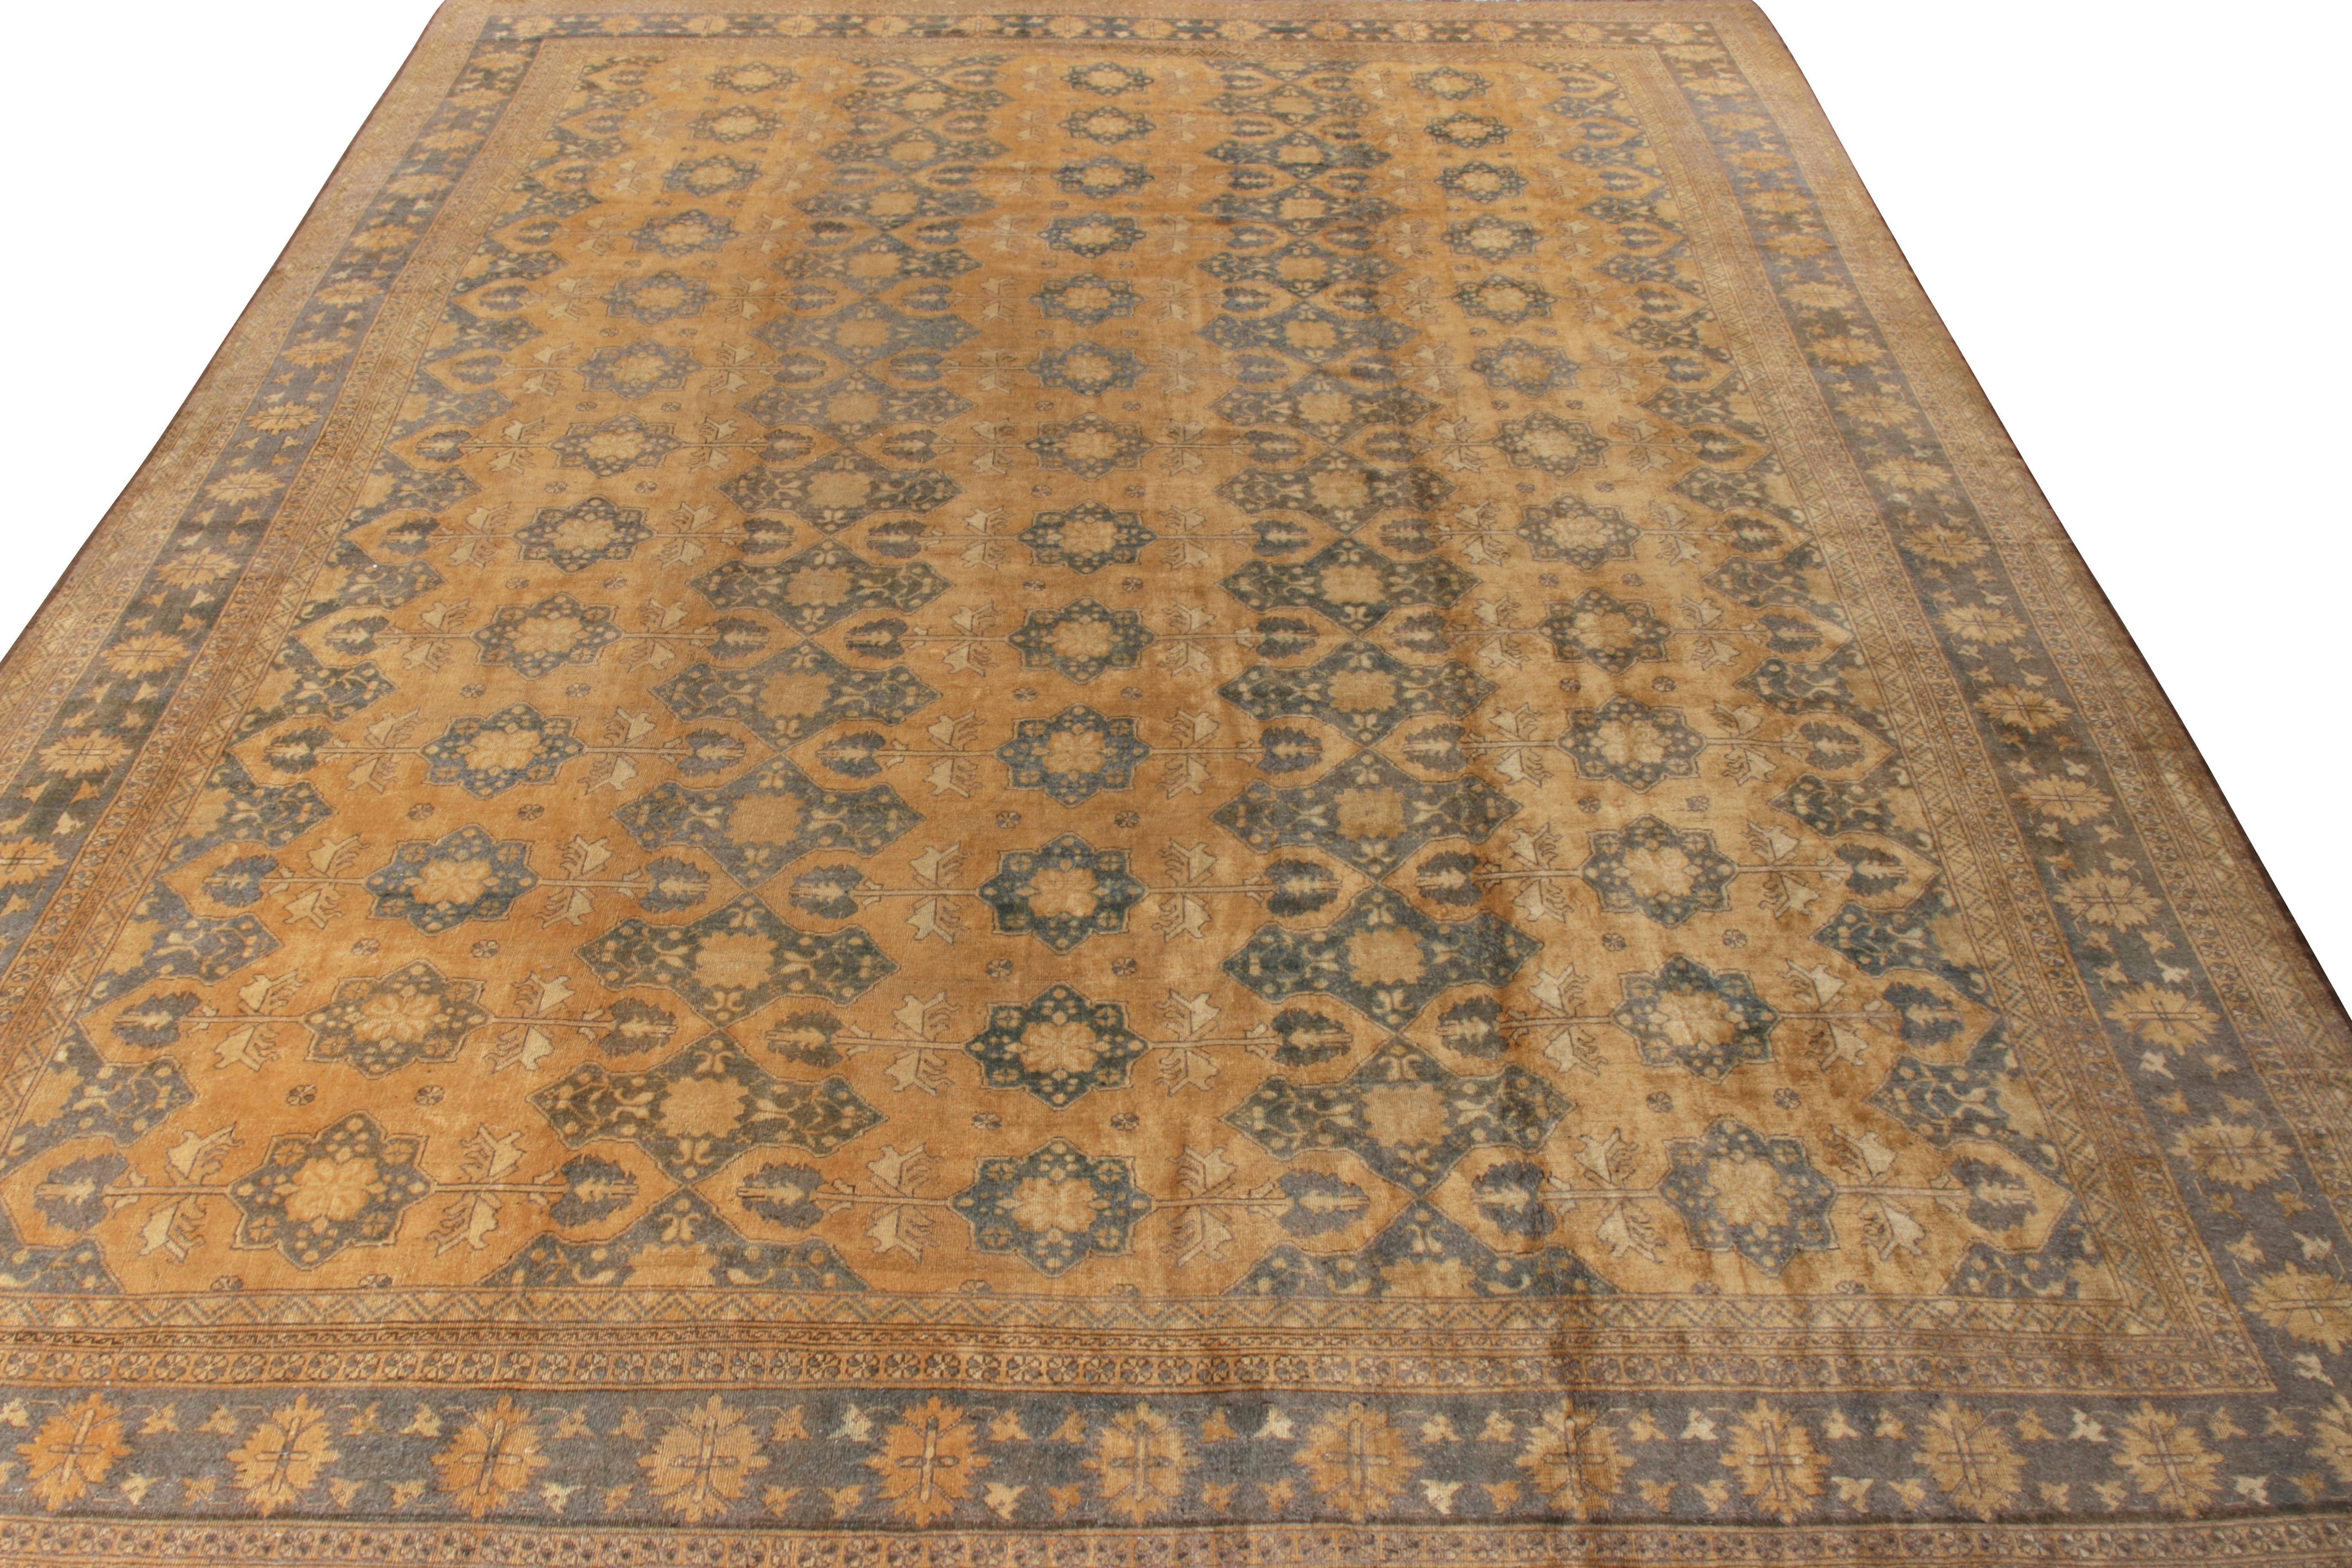 Originating from Afghanistan circa 1950-1960, a handknotted vintage wool Ottoman rug from Rug & Kilim’s coveted Antique & Vintage collection. This 13x16 piece features an all over classic floral design in rich golden-brown and blue hues for a regal